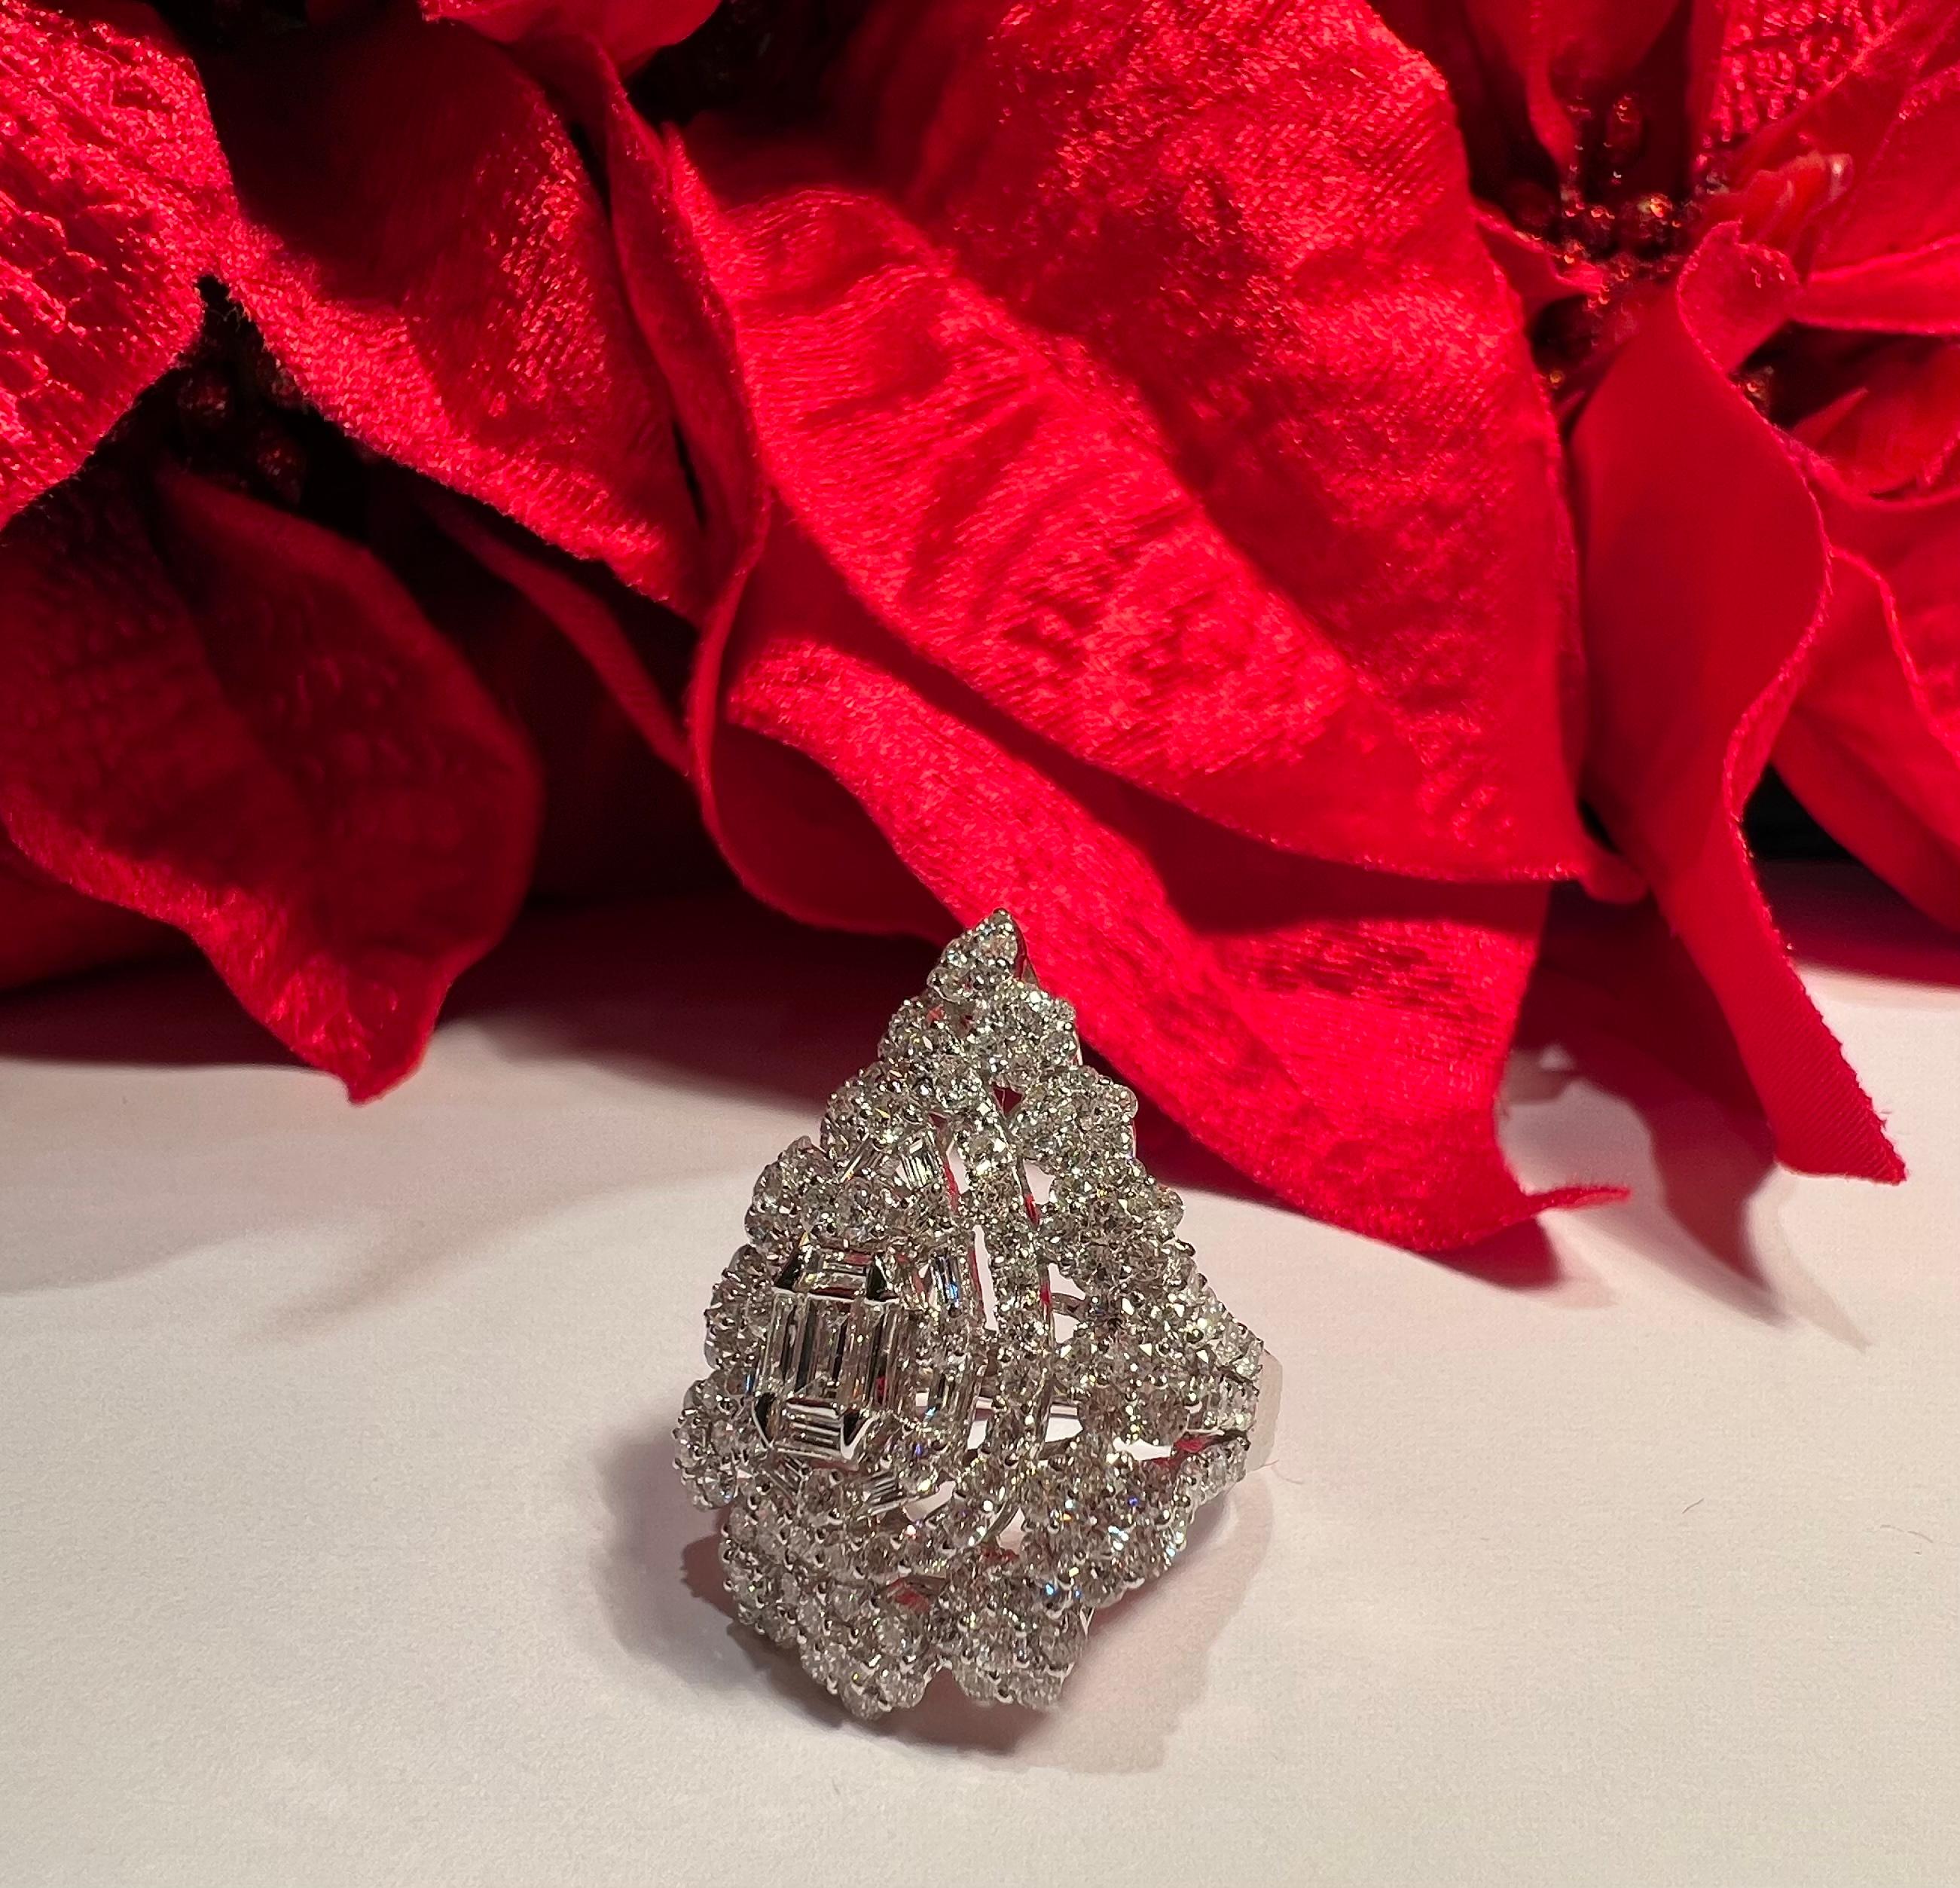  Exquisite Diamond Cluster Pear Shaped Cocktail Ring in 18 Karat White Gold 1